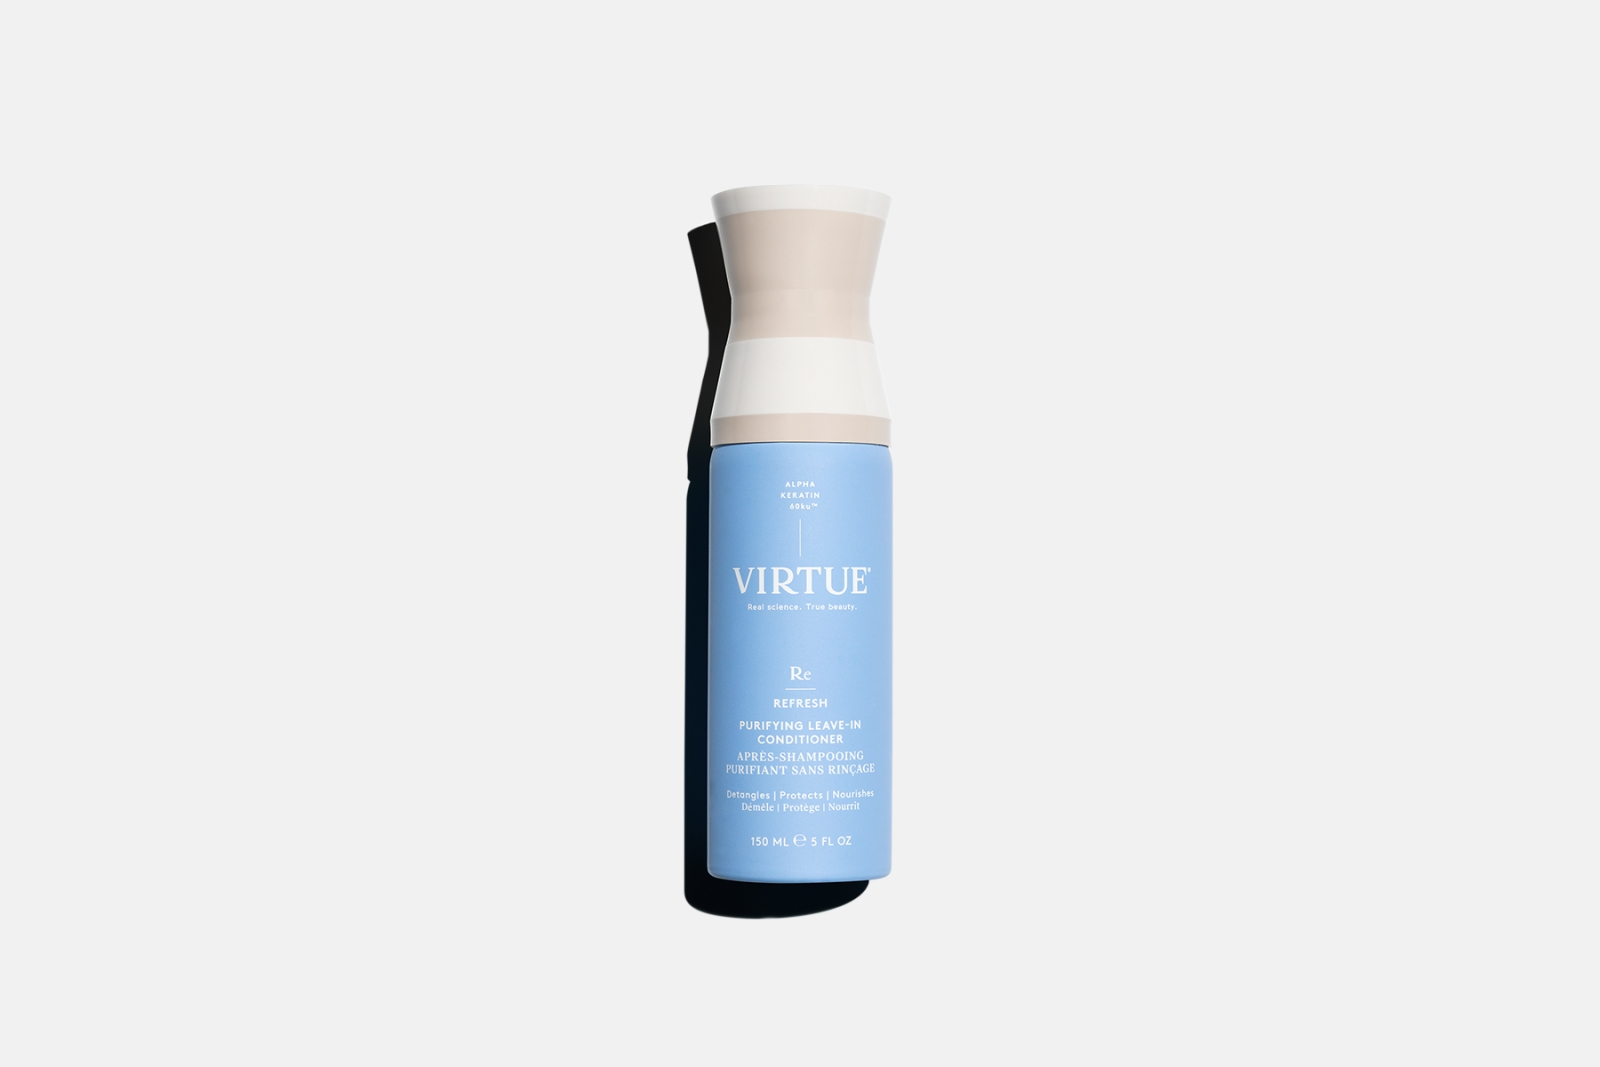 VIRTUE Purifying Leave-in Conditioner 